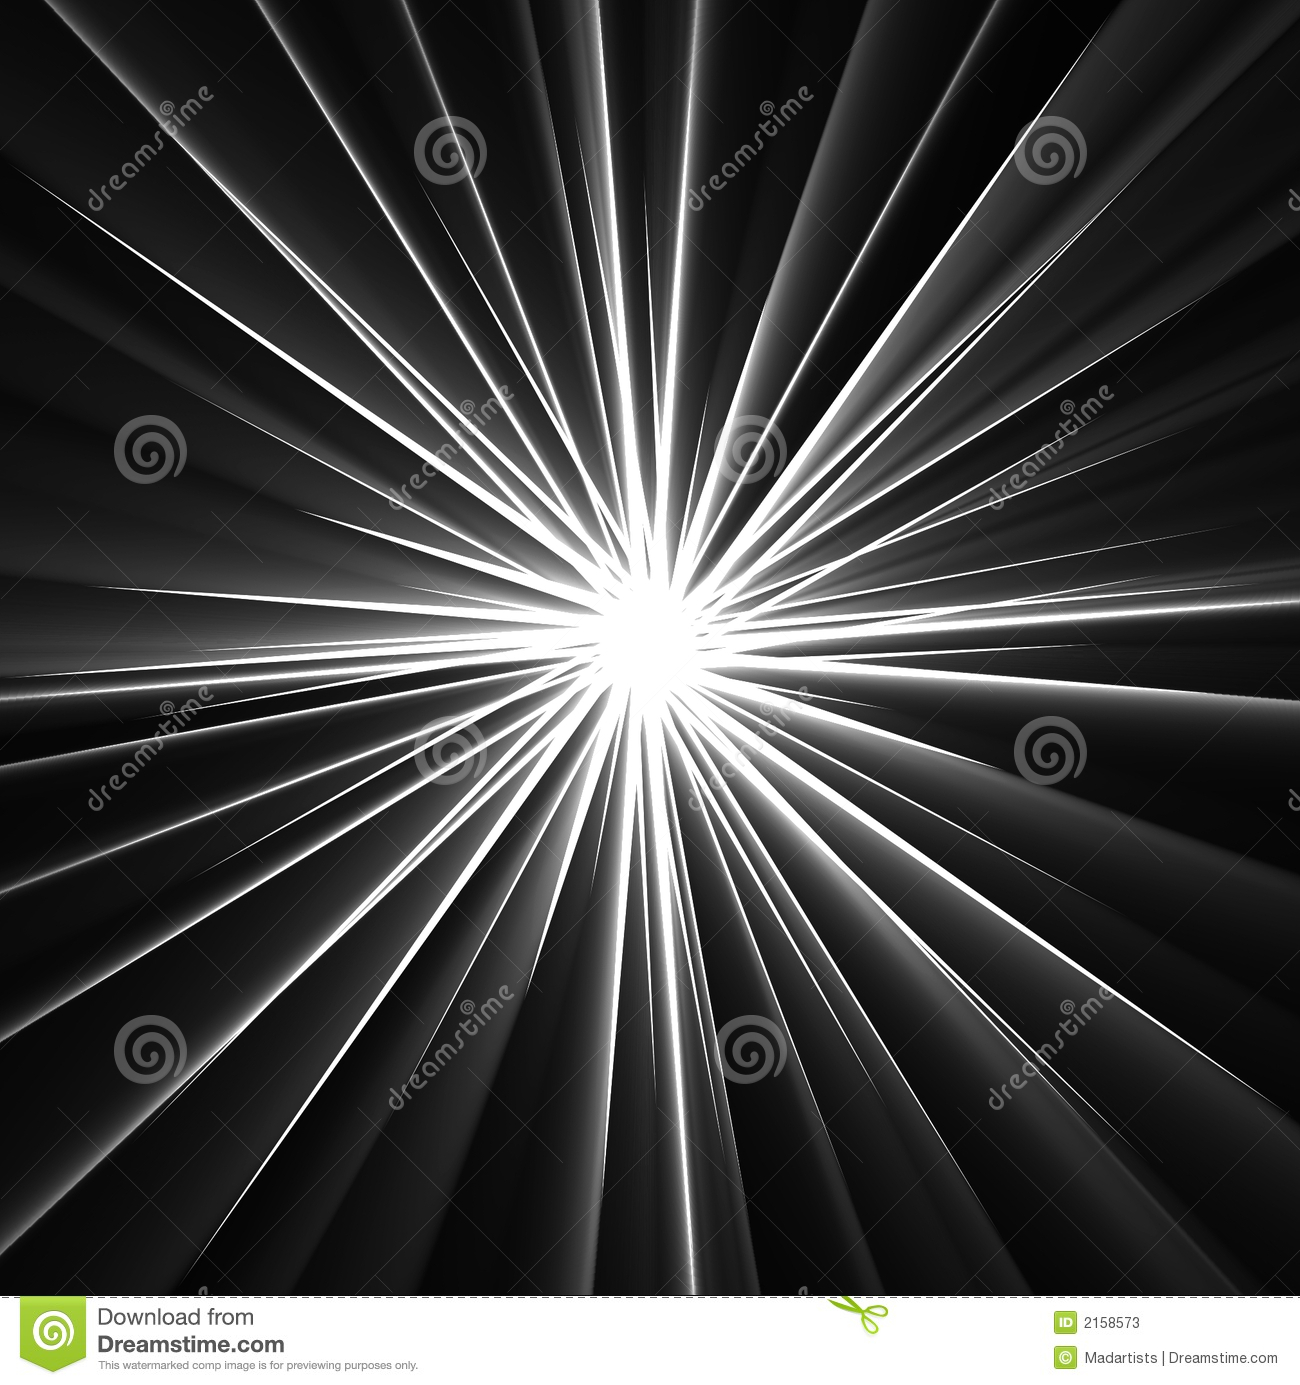 Ray Of Light Clipart Beams Of Light Rays On Black